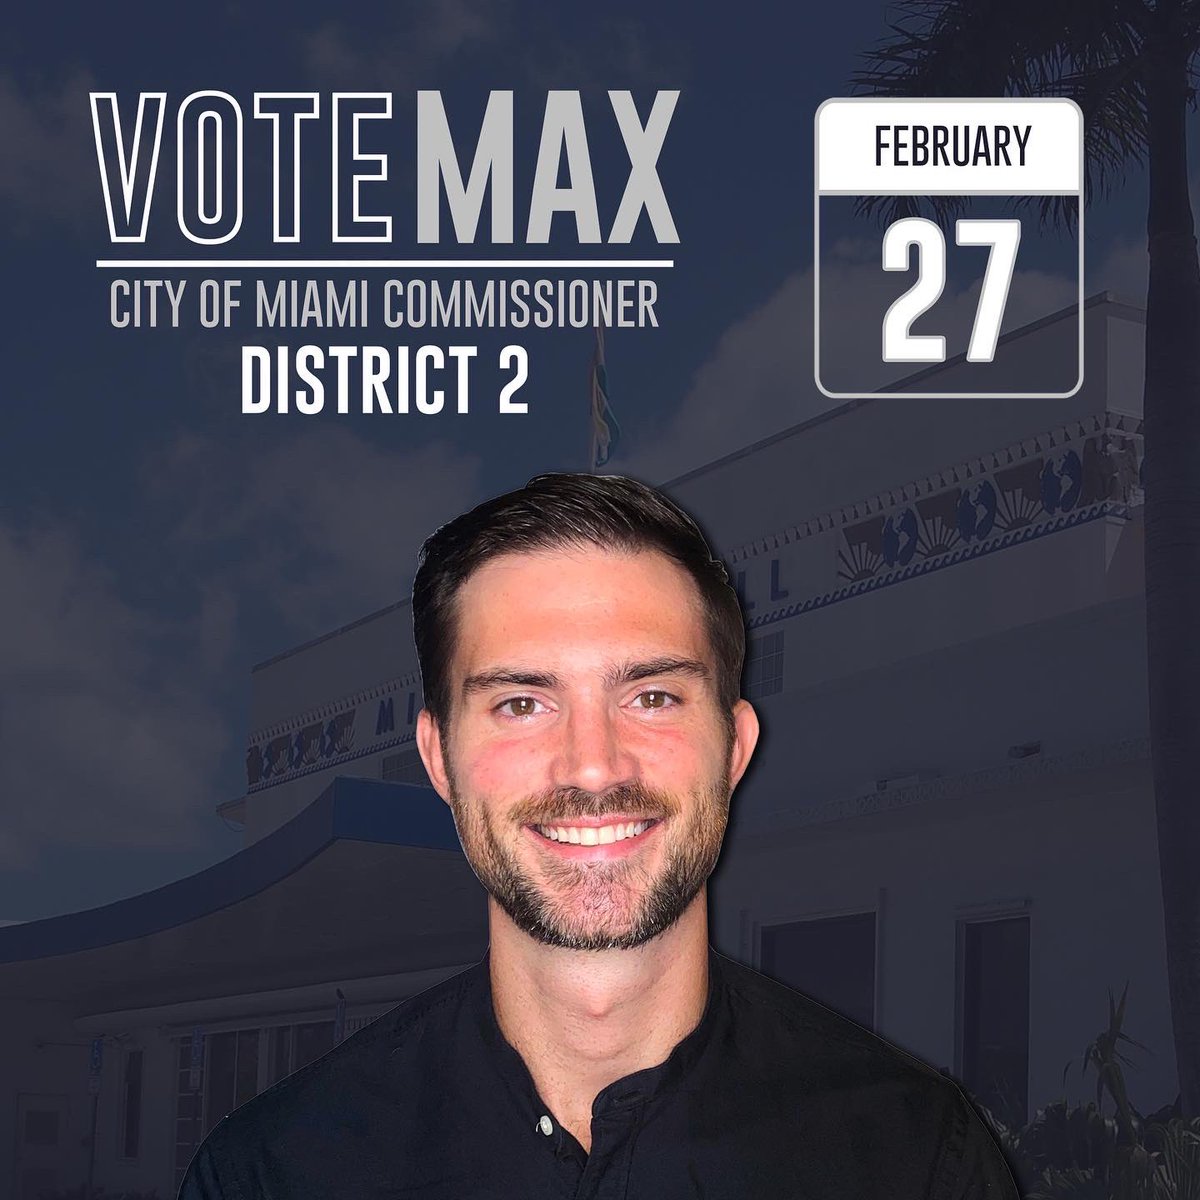 Tonight! Sold out in person. Register via Zoom. 35 days away, let’s do this. #FEB27 events.r20.constantcontact.com/register/m?oei…
•
#votevotevote #coconutgrove #biscaynebay #virginiakey